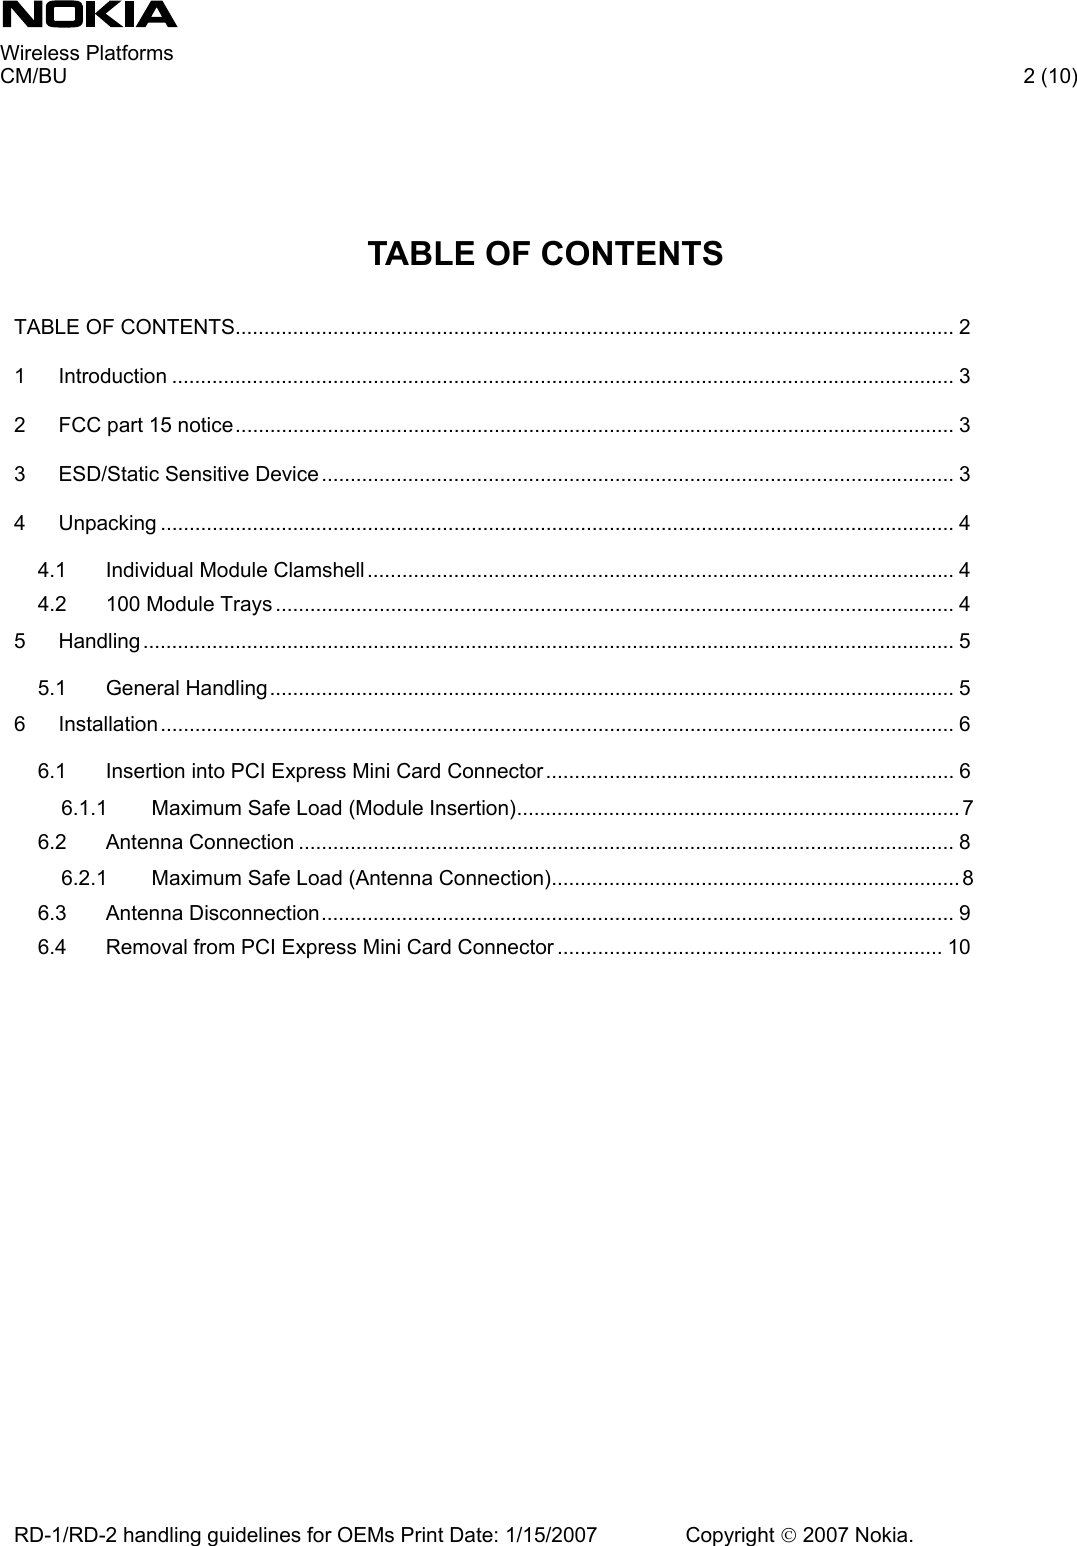     Wireless Platforms     CM/BU   2 (10) RD-1/RD-2 handling guidelines for OEMs Print Date: 1/15/2007   Copyright © 2007 Nokia.      TABLE OF CONTENTS  TABLE OF CONTENTS............................................................................................................................. 2 1 Introduction ........................................................................................................................................ 3 2 FCC part 15 notice............................................................................................................................. 3 3 ESD/Static Sensitive Device .............................................................................................................. 3 4 Unpacking .......................................................................................................................................... 4 4.1 Individual Module Clamshell...................................................................................................... 4 4.2 100 Module Trays ...................................................................................................................... 4 5 Handling............................................................................................................................................. 5 5.1 General Handling....................................................................................................................... 5 6 Installation.......................................................................................................................................... 6 6.1 Insertion into PCI Express Mini Card Connector ....................................................................... 6 6.1.1 Maximum Safe Load (Module Insertion)............................................................................. 7 6.2 Antenna Connection .................................................................................................................. 8 6.2.1 Maximum Safe Load (Antenna Connection)....................................................................... 8 6.3 Antenna Disconnection.............................................................................................................. 9 6.4 Removal from PCI Express Mini Card Connector ................................................................... 10  